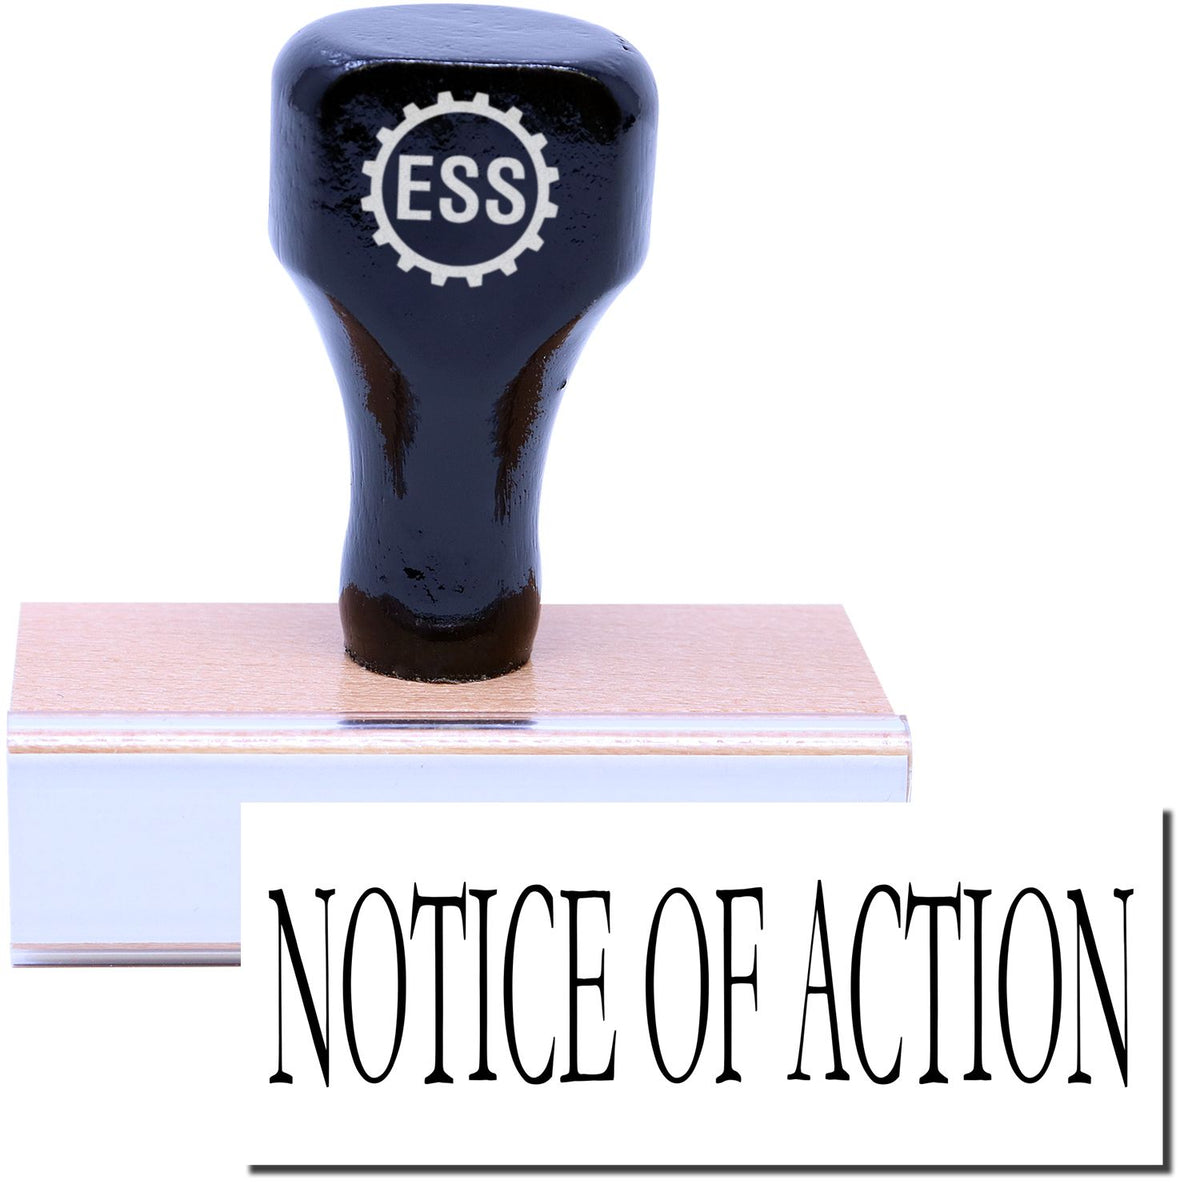 A stock office rubber stamp with a stamped image showing how the text &quot;NOTICE OF ACTION&quot; is displayed after stamping.